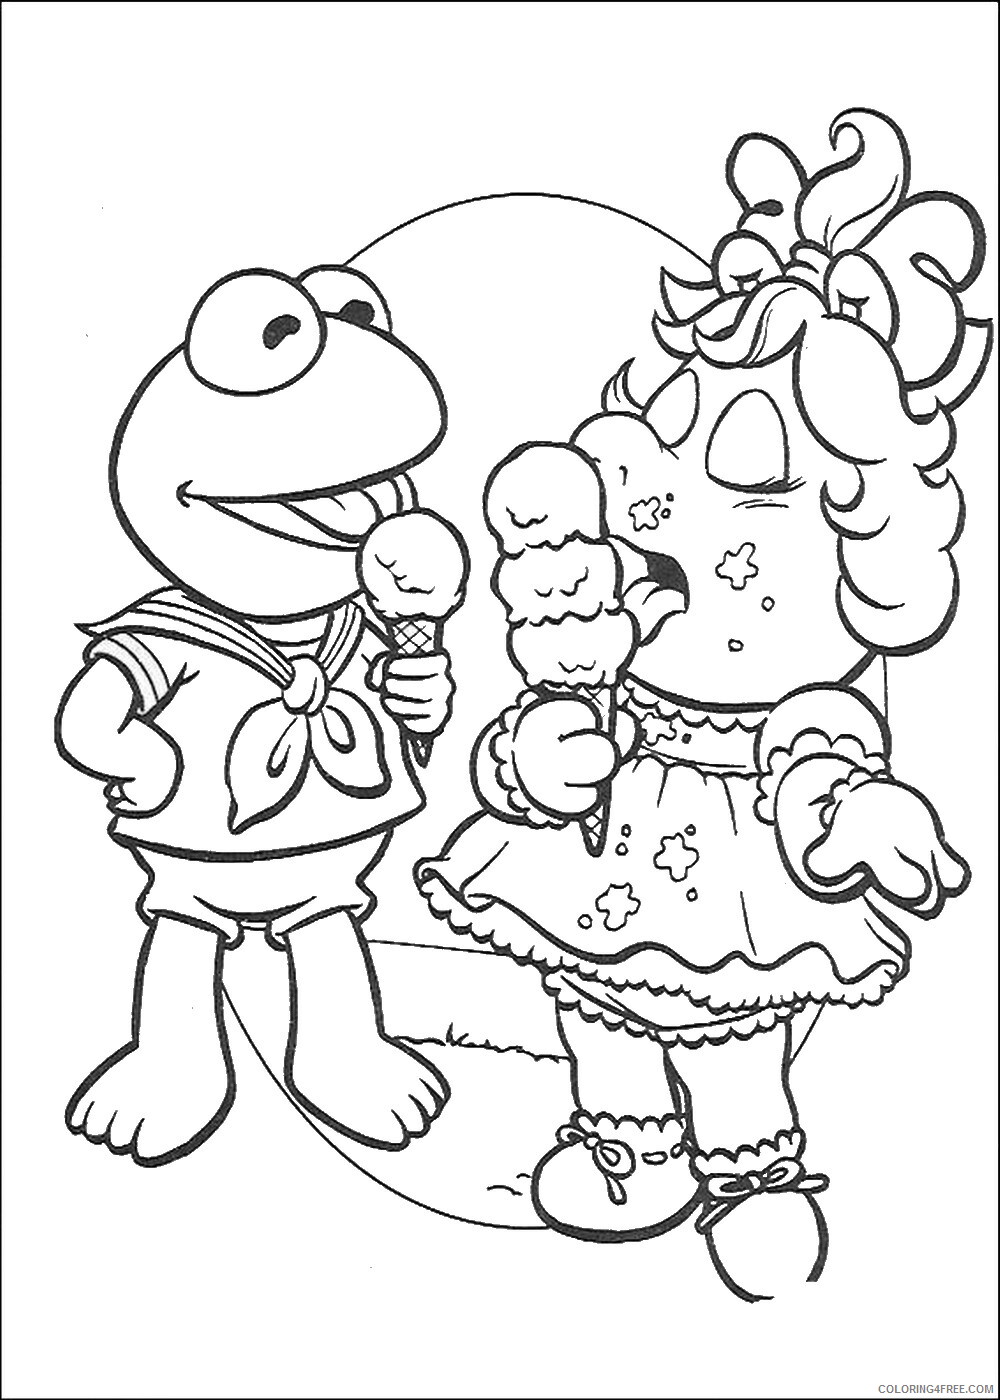 The Muppet Show Coloring Pages TV Film muppets_cl_13 Printable 2020 09372 Coloring4free